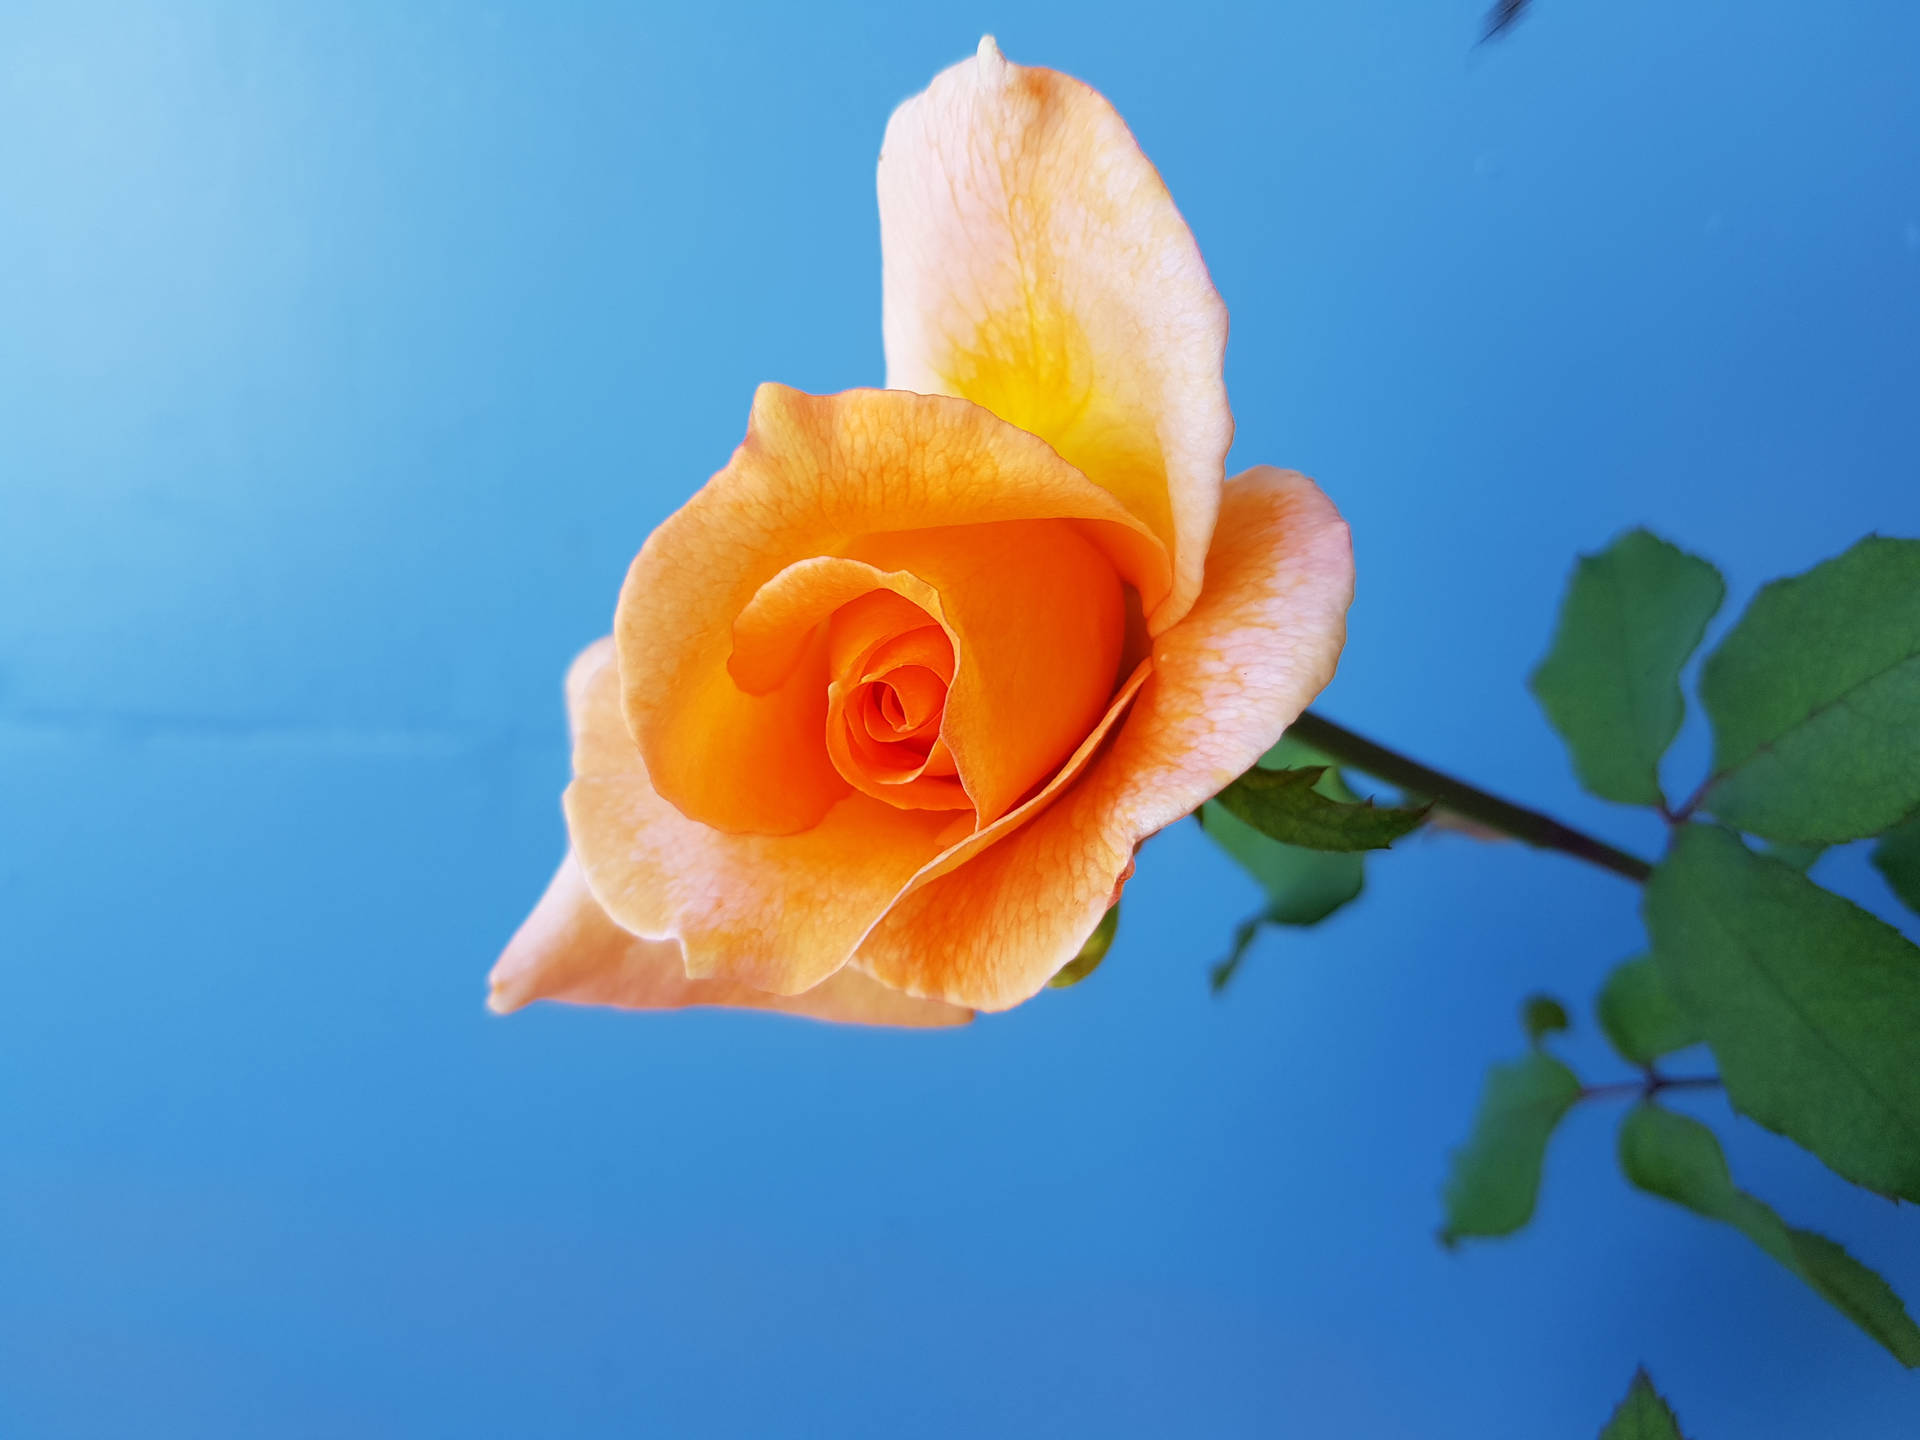 Sky And Yellow Rose Flower